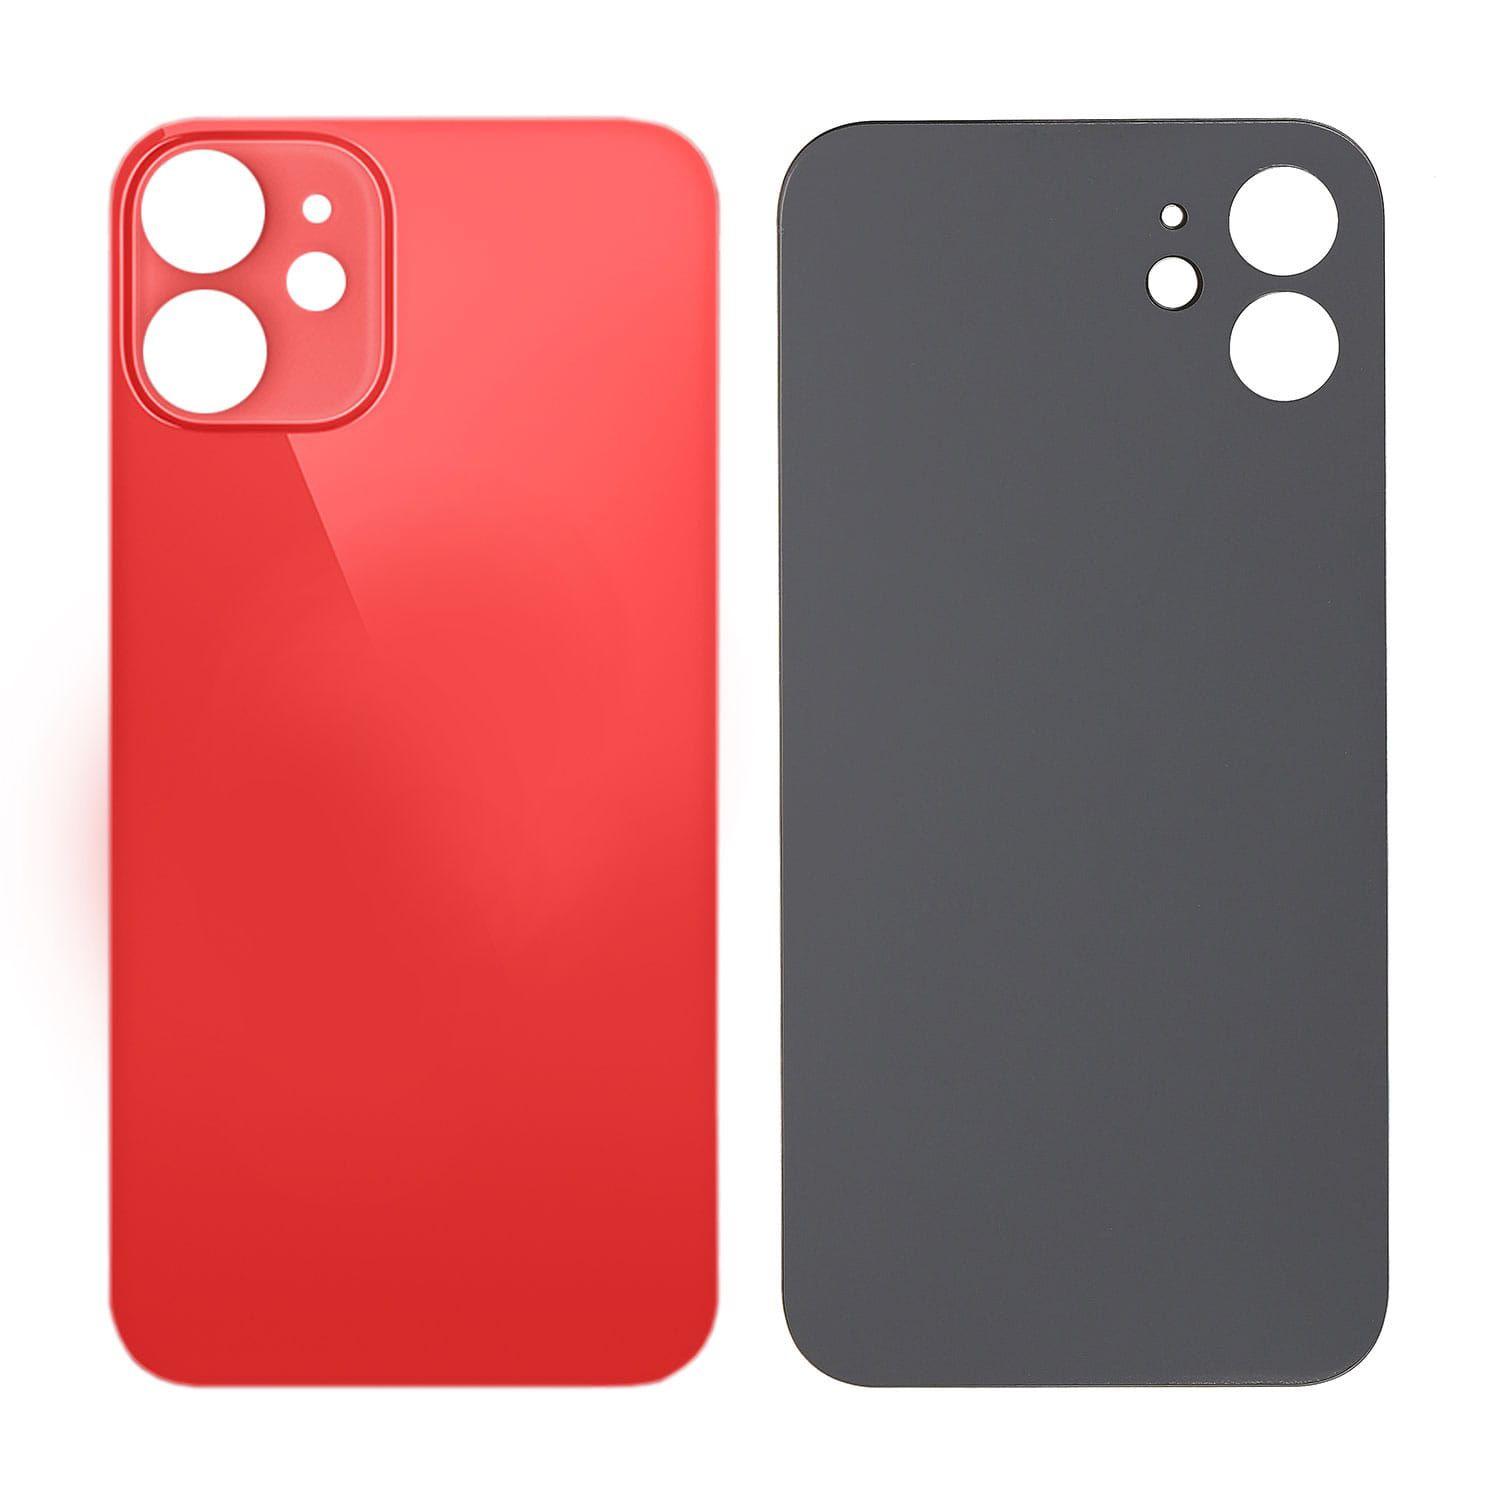 Battery cover iPhone 12 with bigger hole for camera glass - red